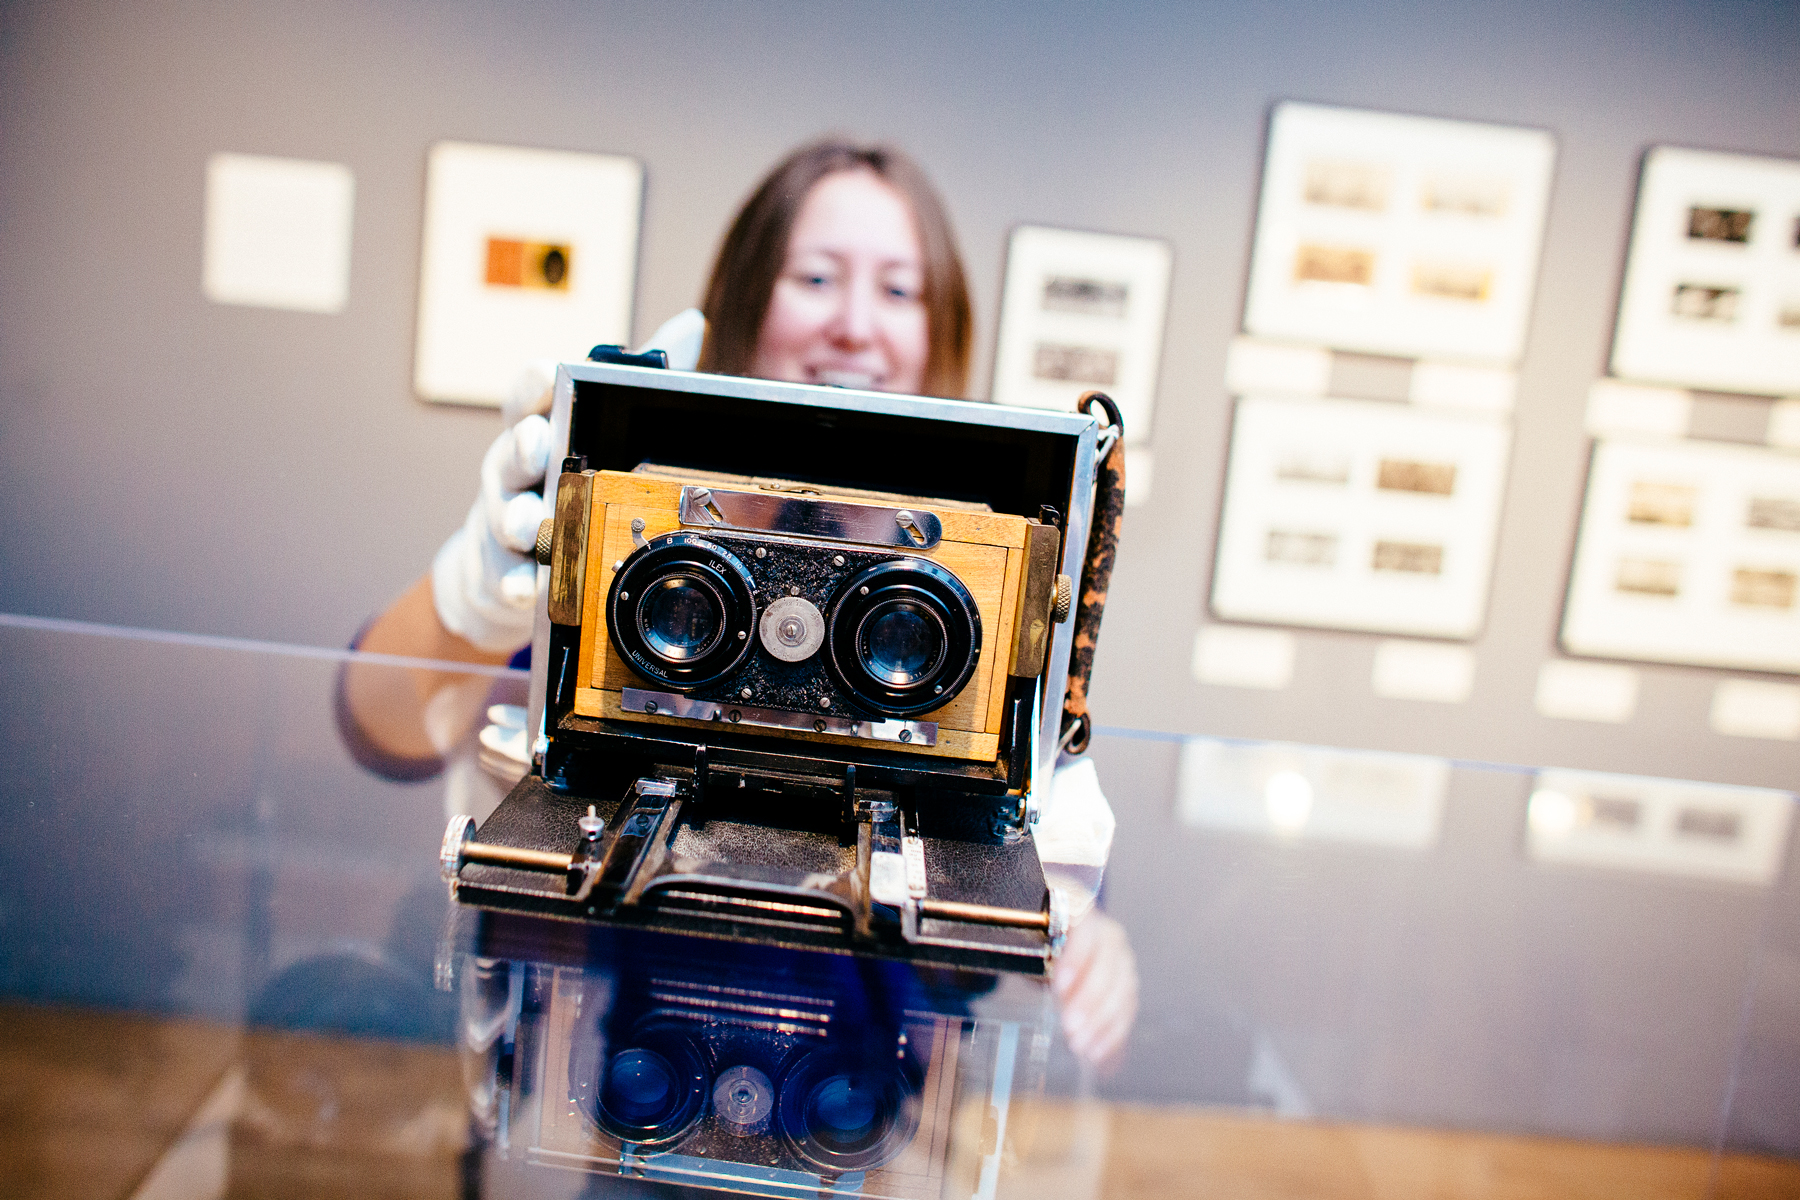 A person wearing white gloves holds an old camera in a museum gallery